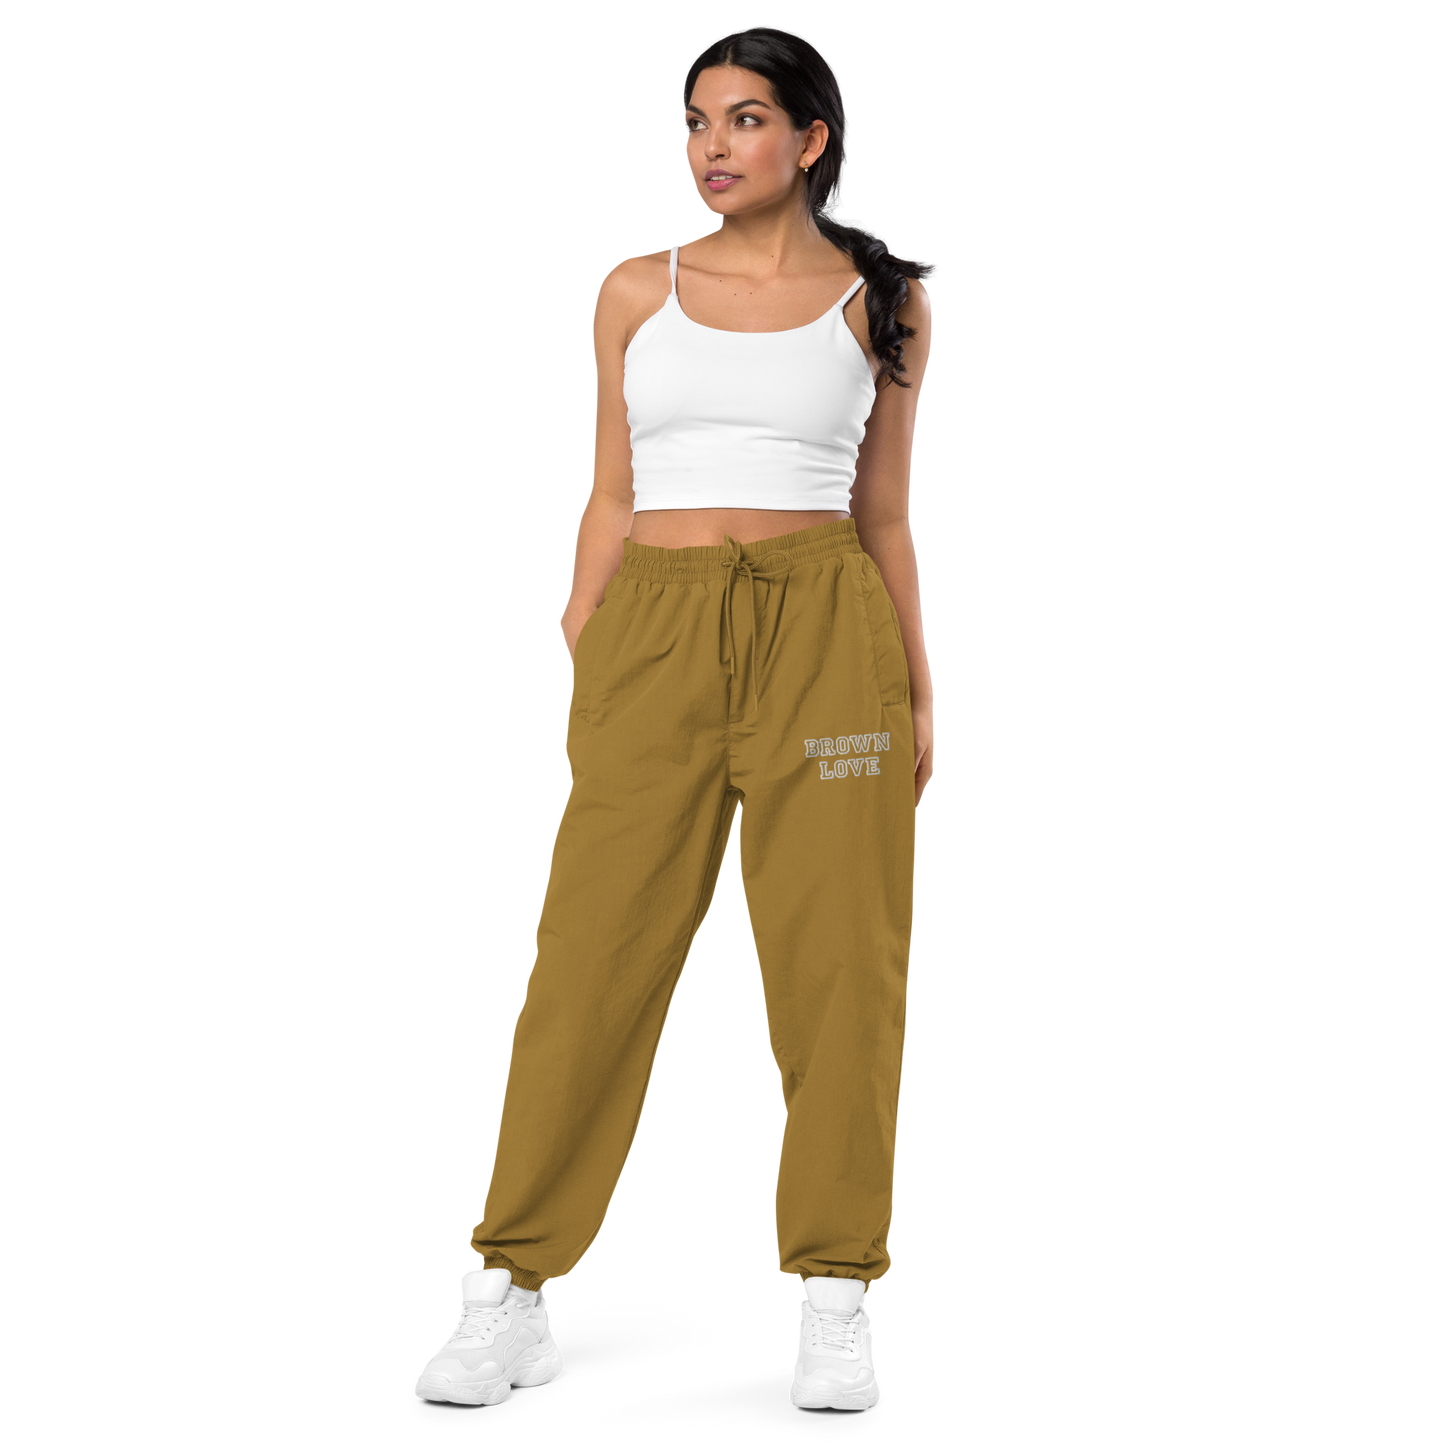 Brown Love - Embroidered Recycled Track Pants